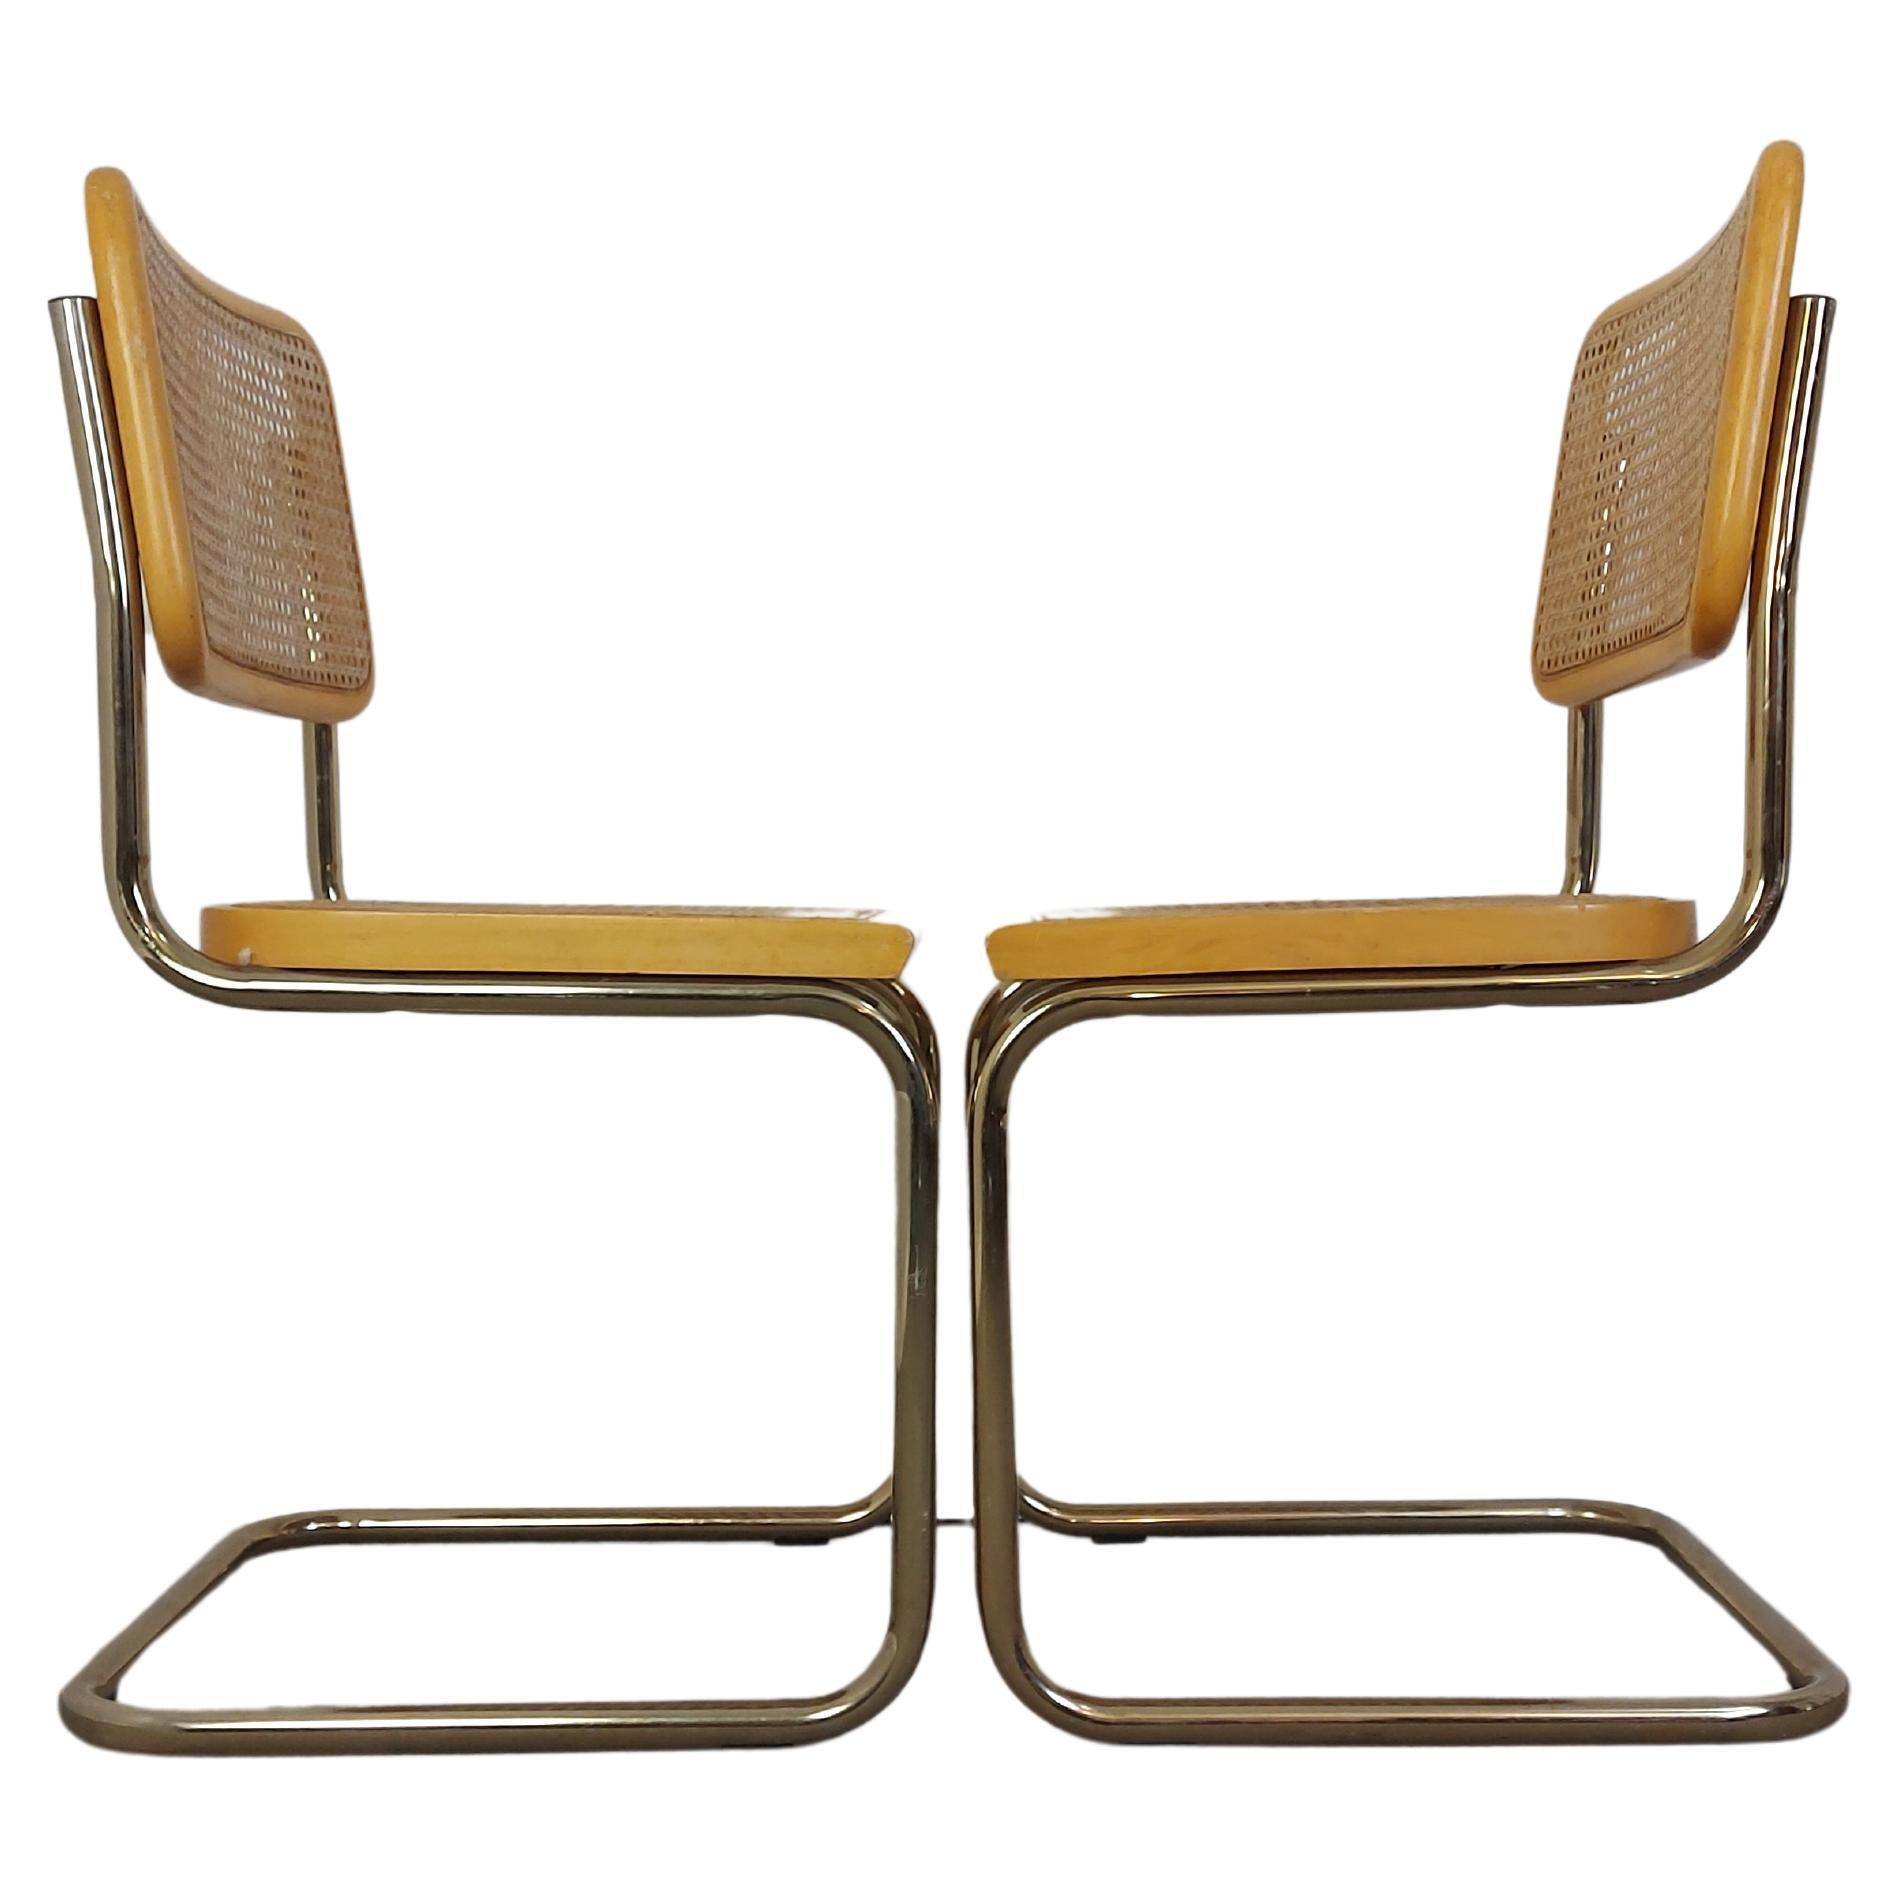 Chair Pair beautiful design Classic
Period: 1980s
Style: Mid-Century Modern, Classic
Materials: wood, cane webbing, chromed metal frame
Colours: Clear wood, Chromed metal frame with gold plating
Condition: Wood, cane, chrome beautiful vintage